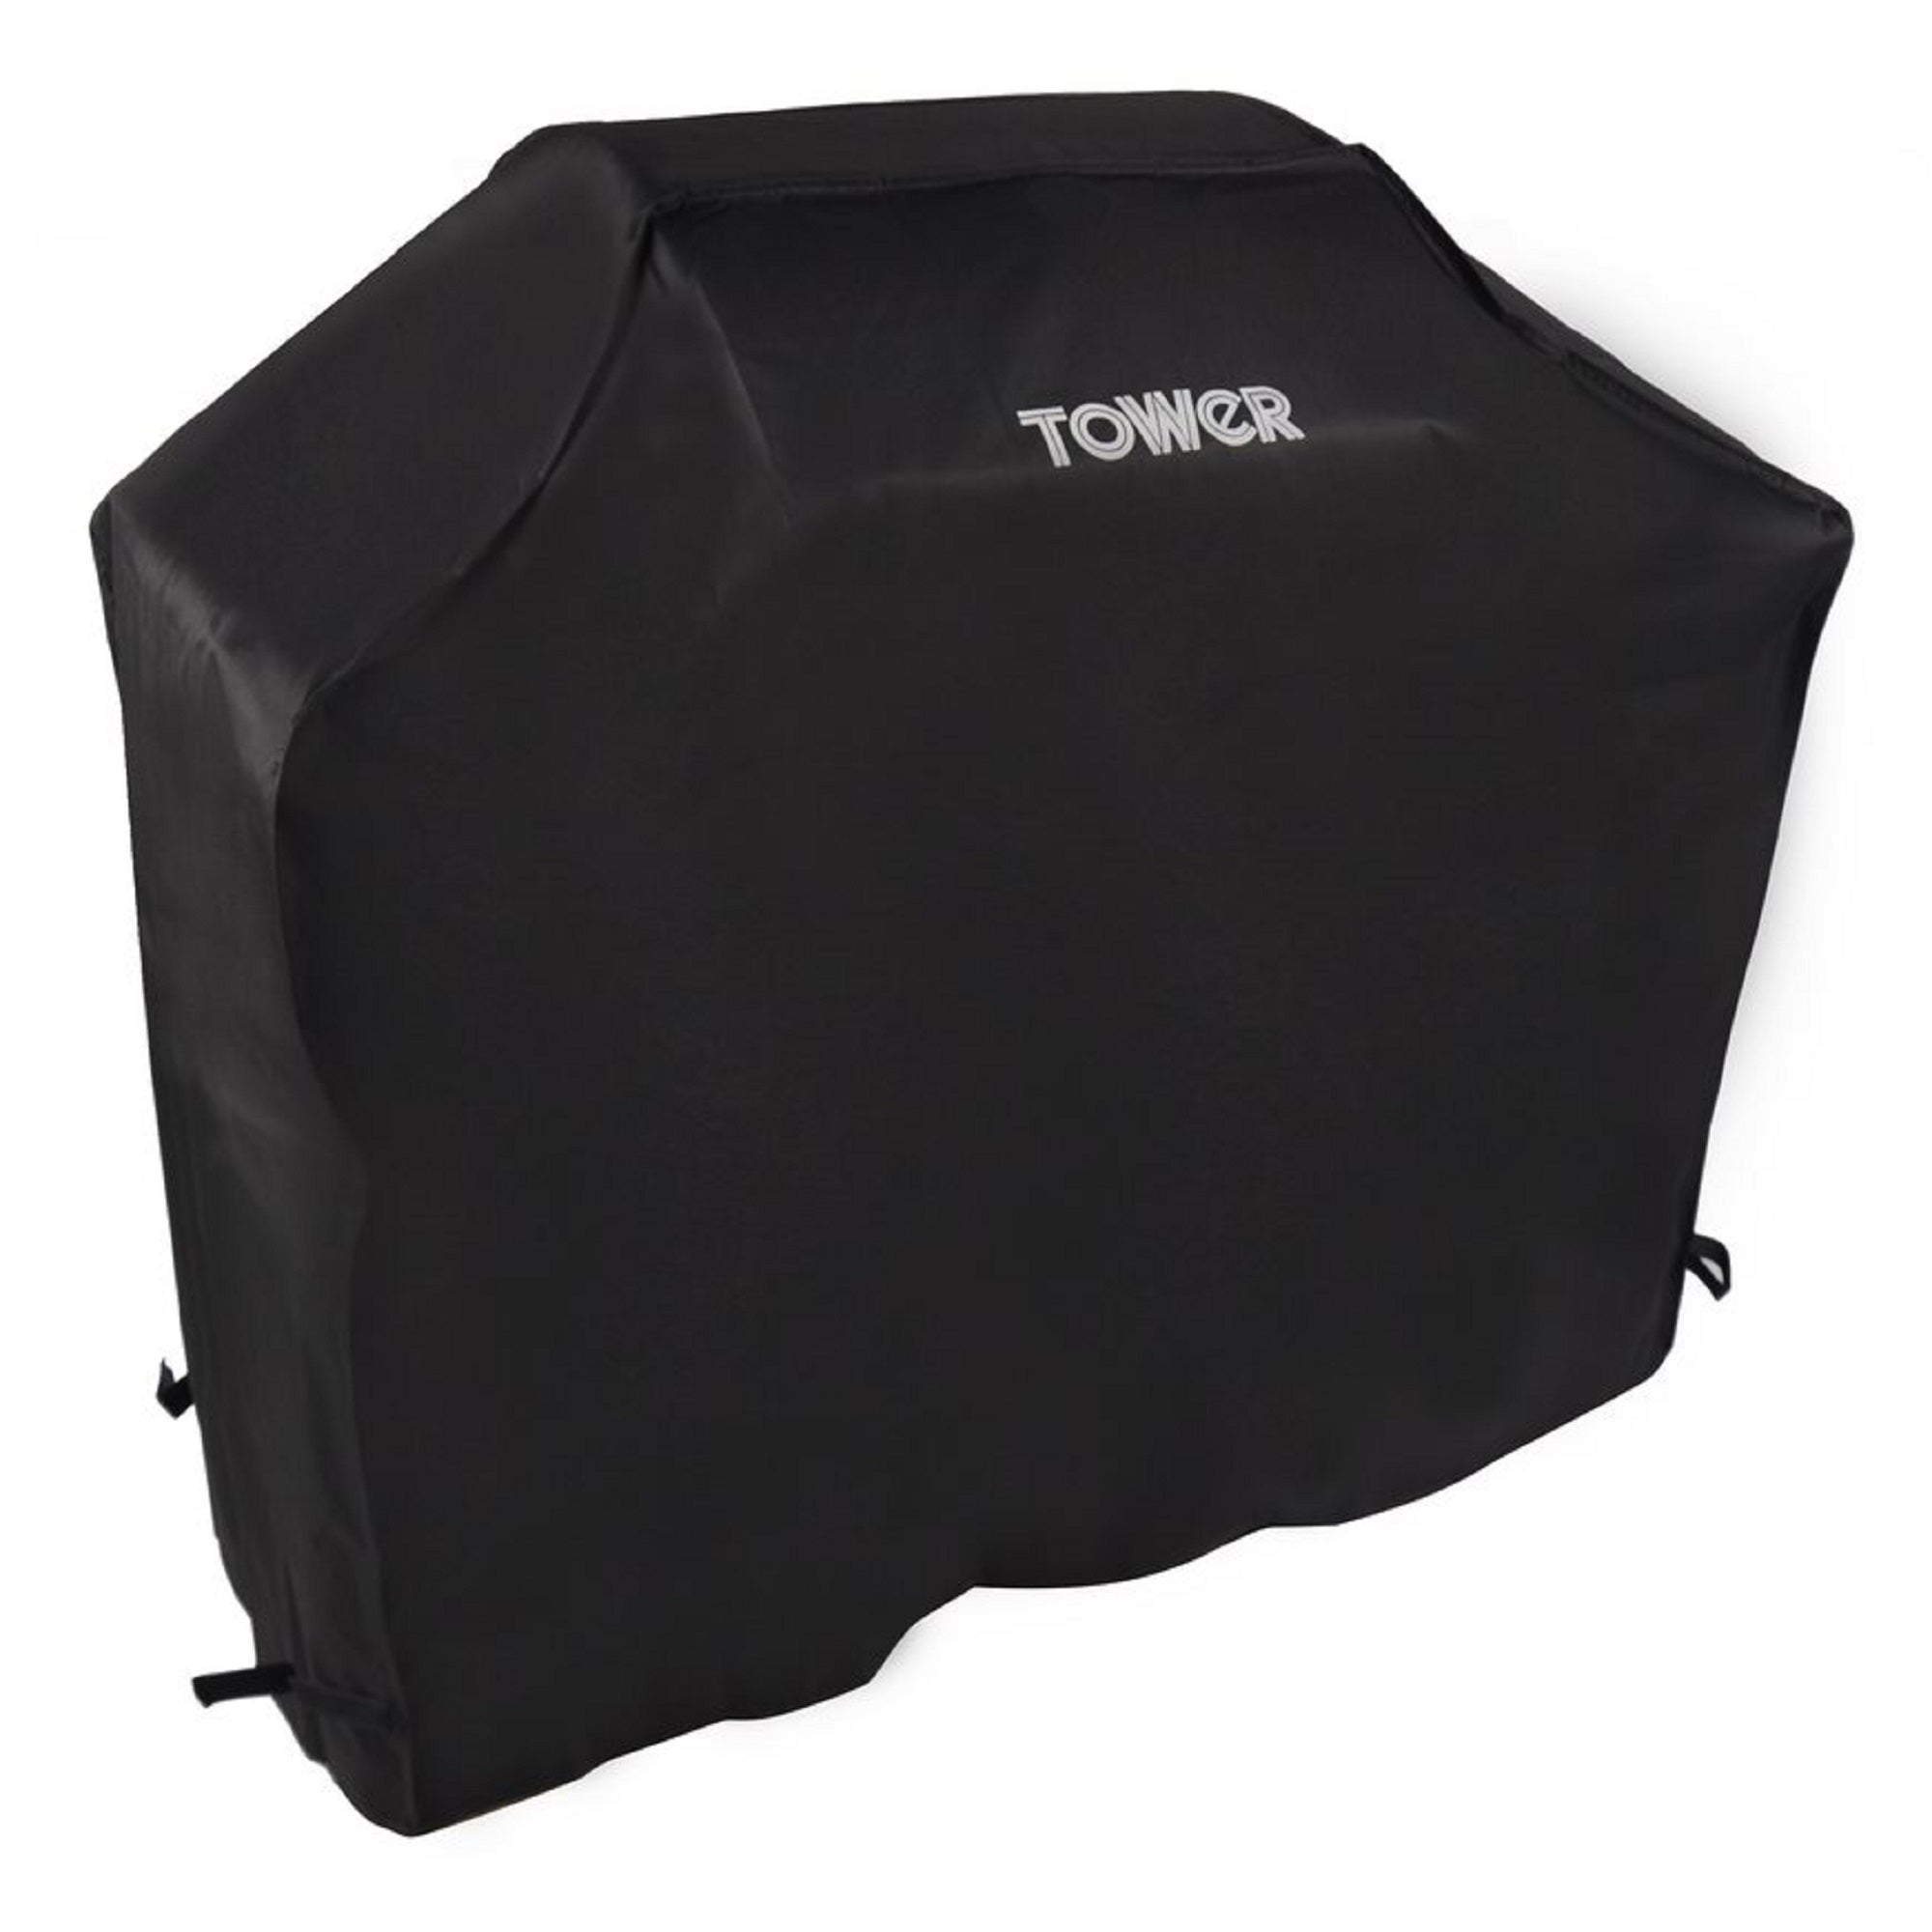 Photos - BBQ Accessory Tower Stealth 2000 BBQ Grill Cover Black 